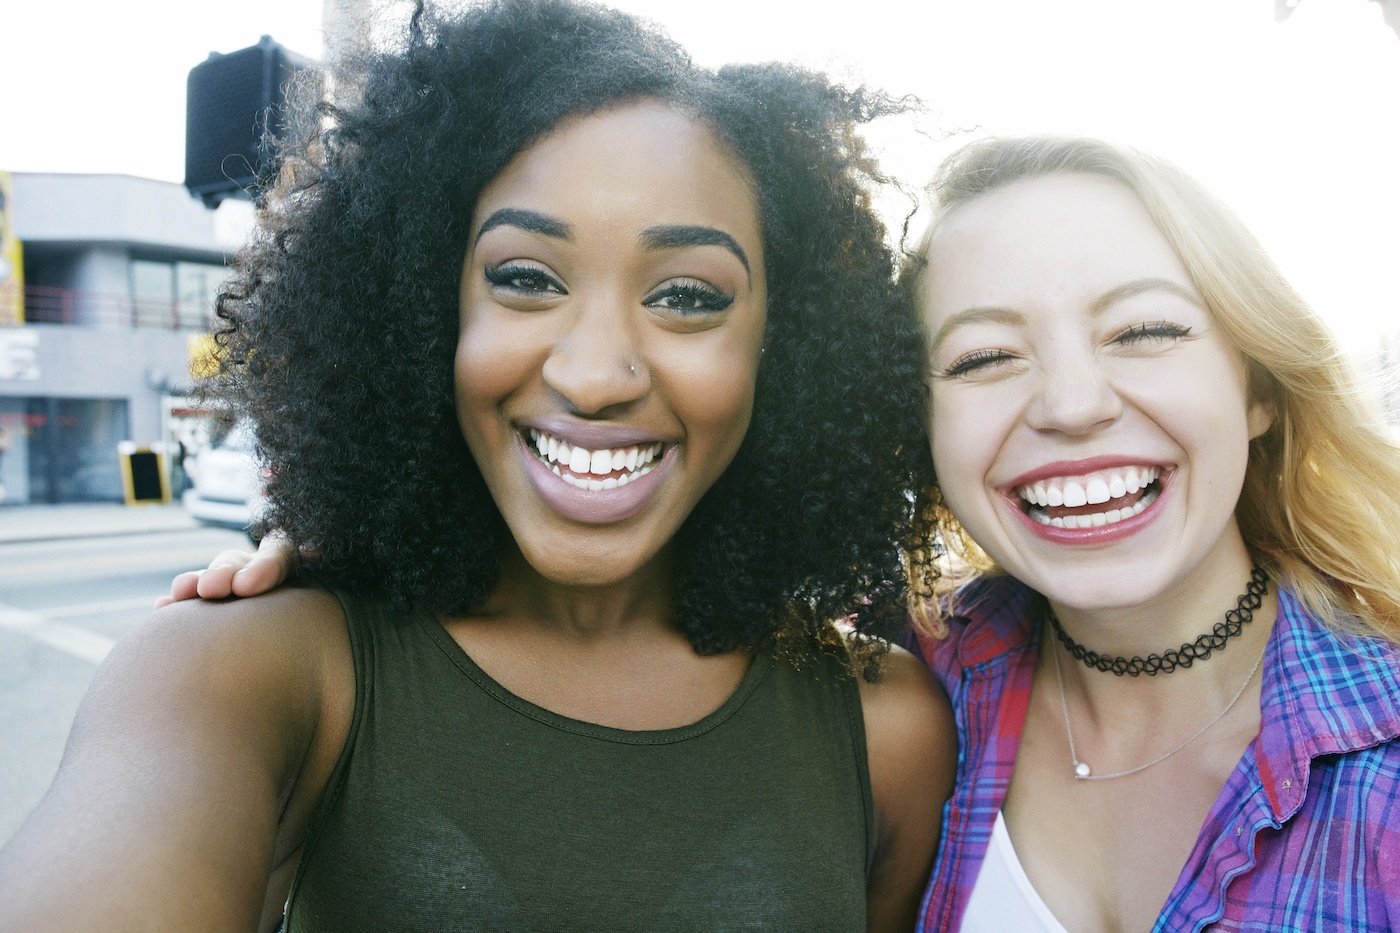 HERE’S HOW TO FIND OUT YOUR MYERS-BRIGGS PERSONALITY TYPE—AND WHAT IT MEANS